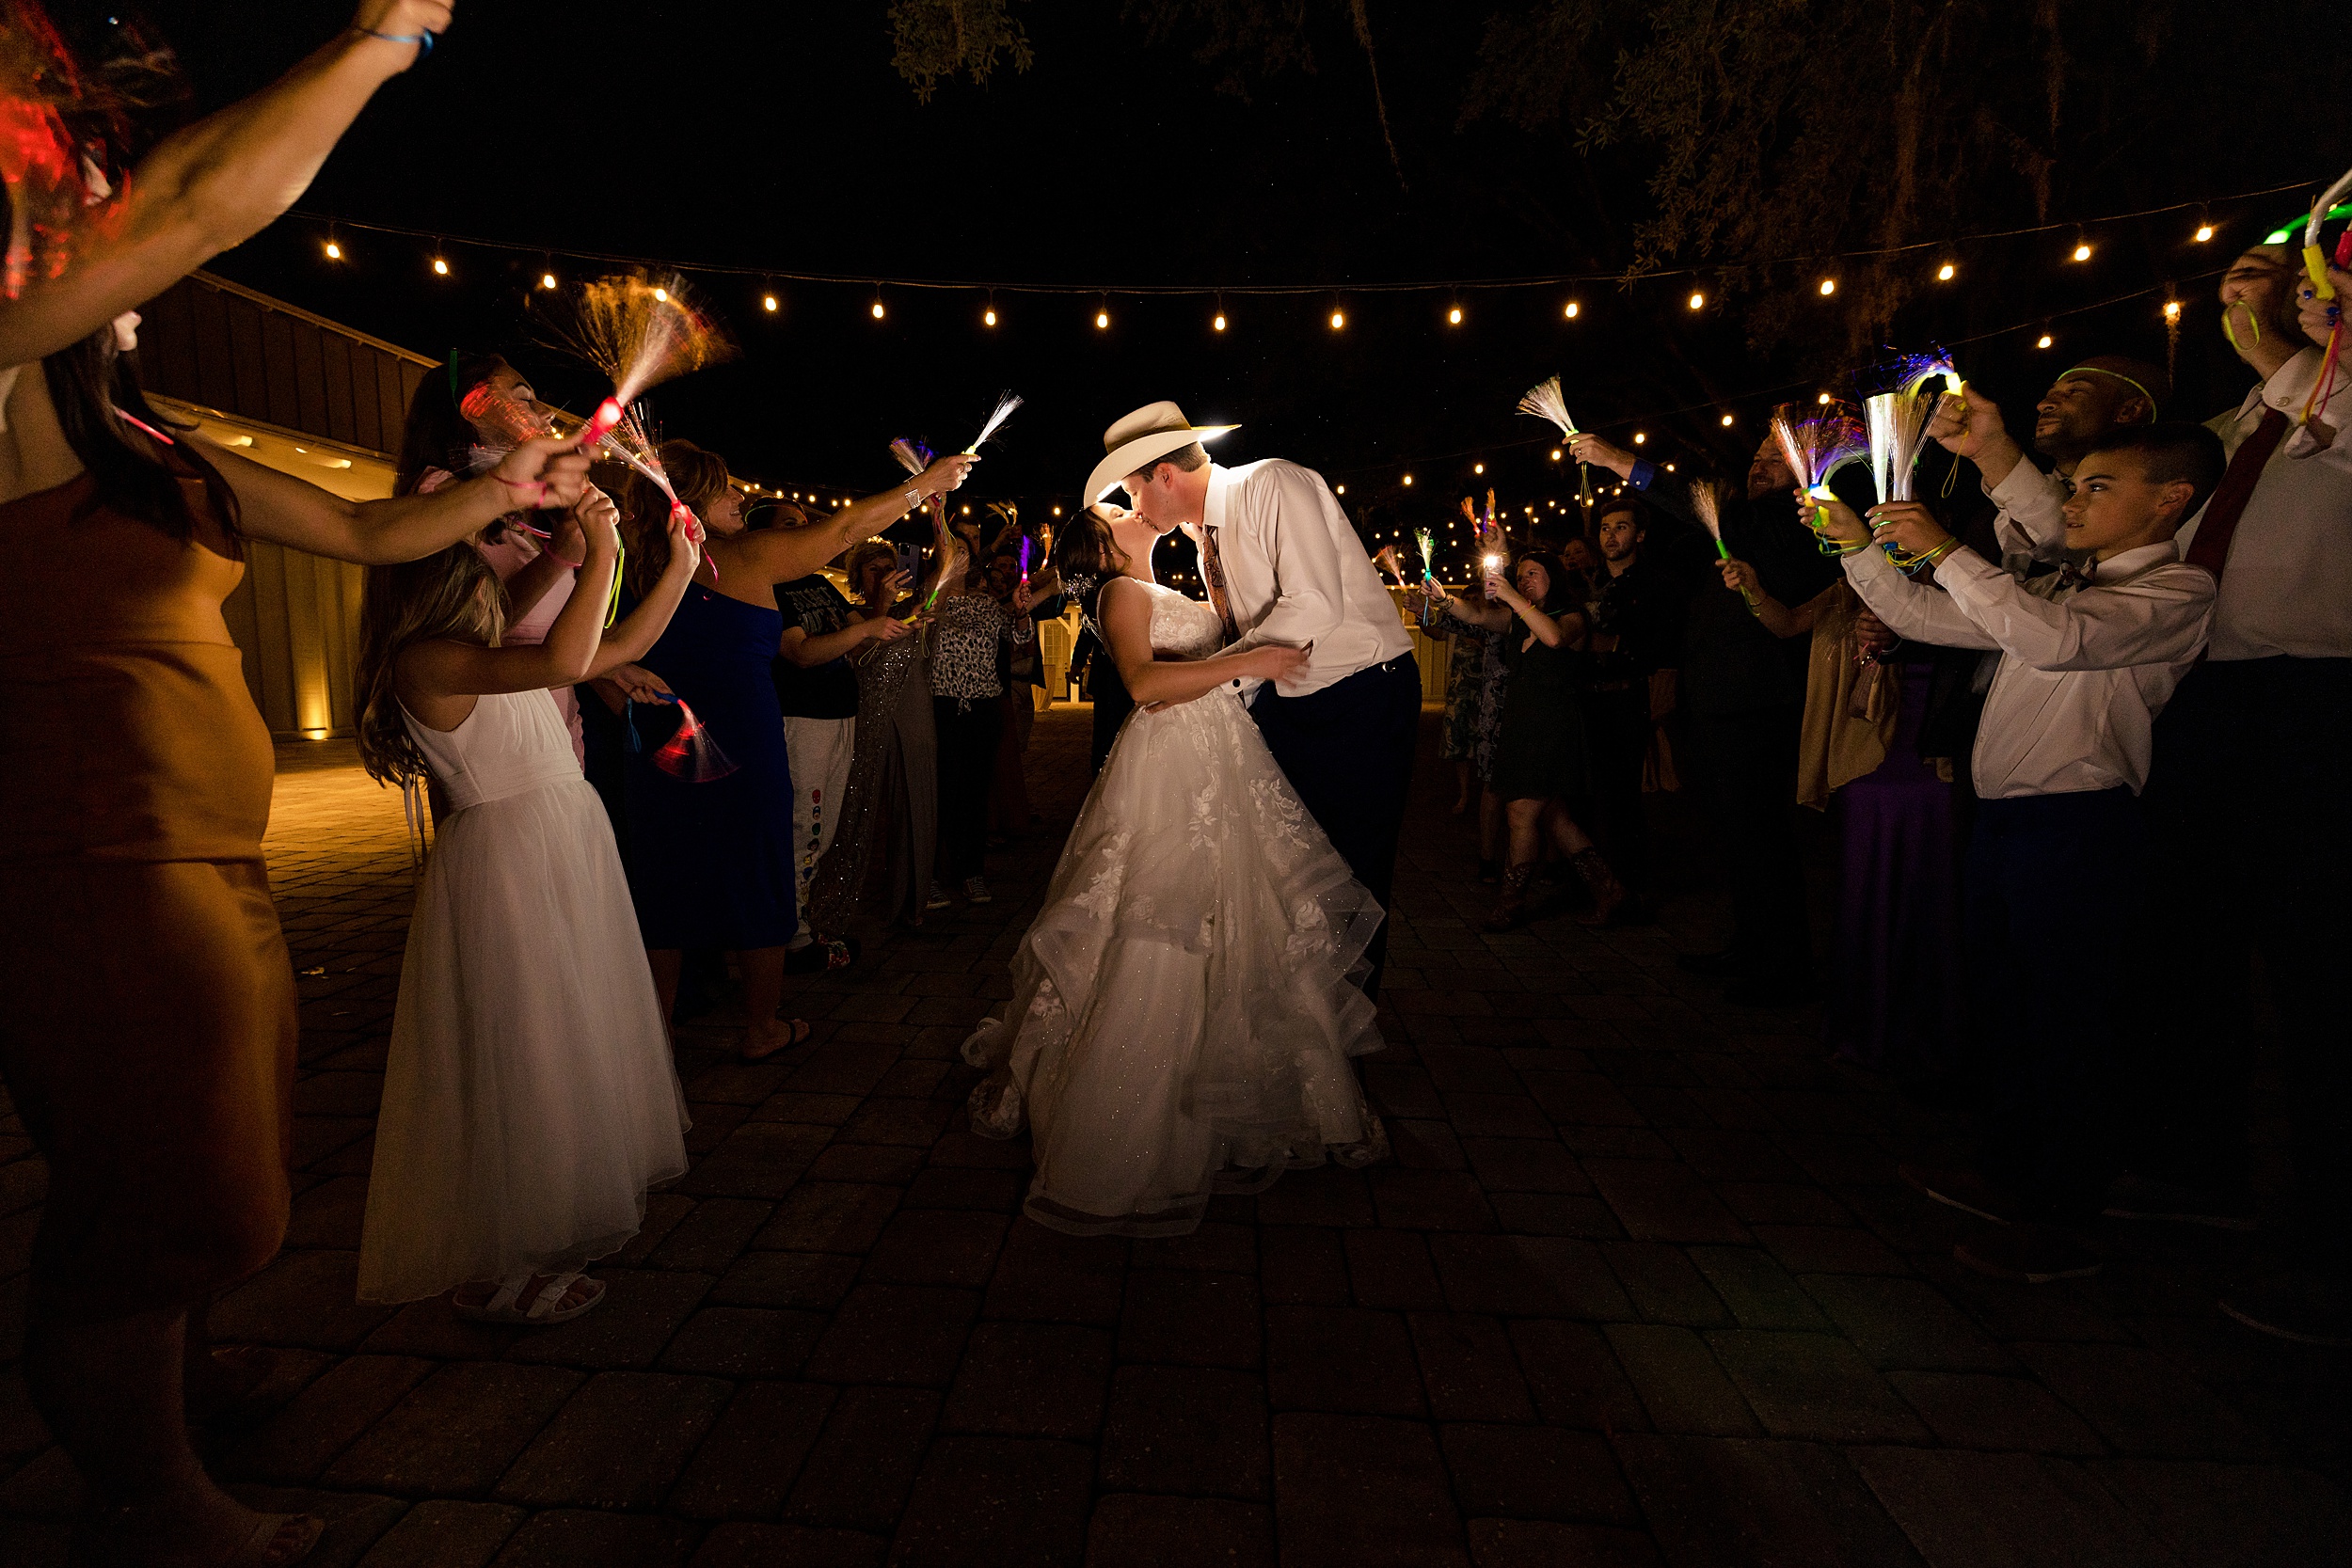 Newlyweds kiss while exiting their bowing oaks wedding reception with guests surrounding them with glow wands